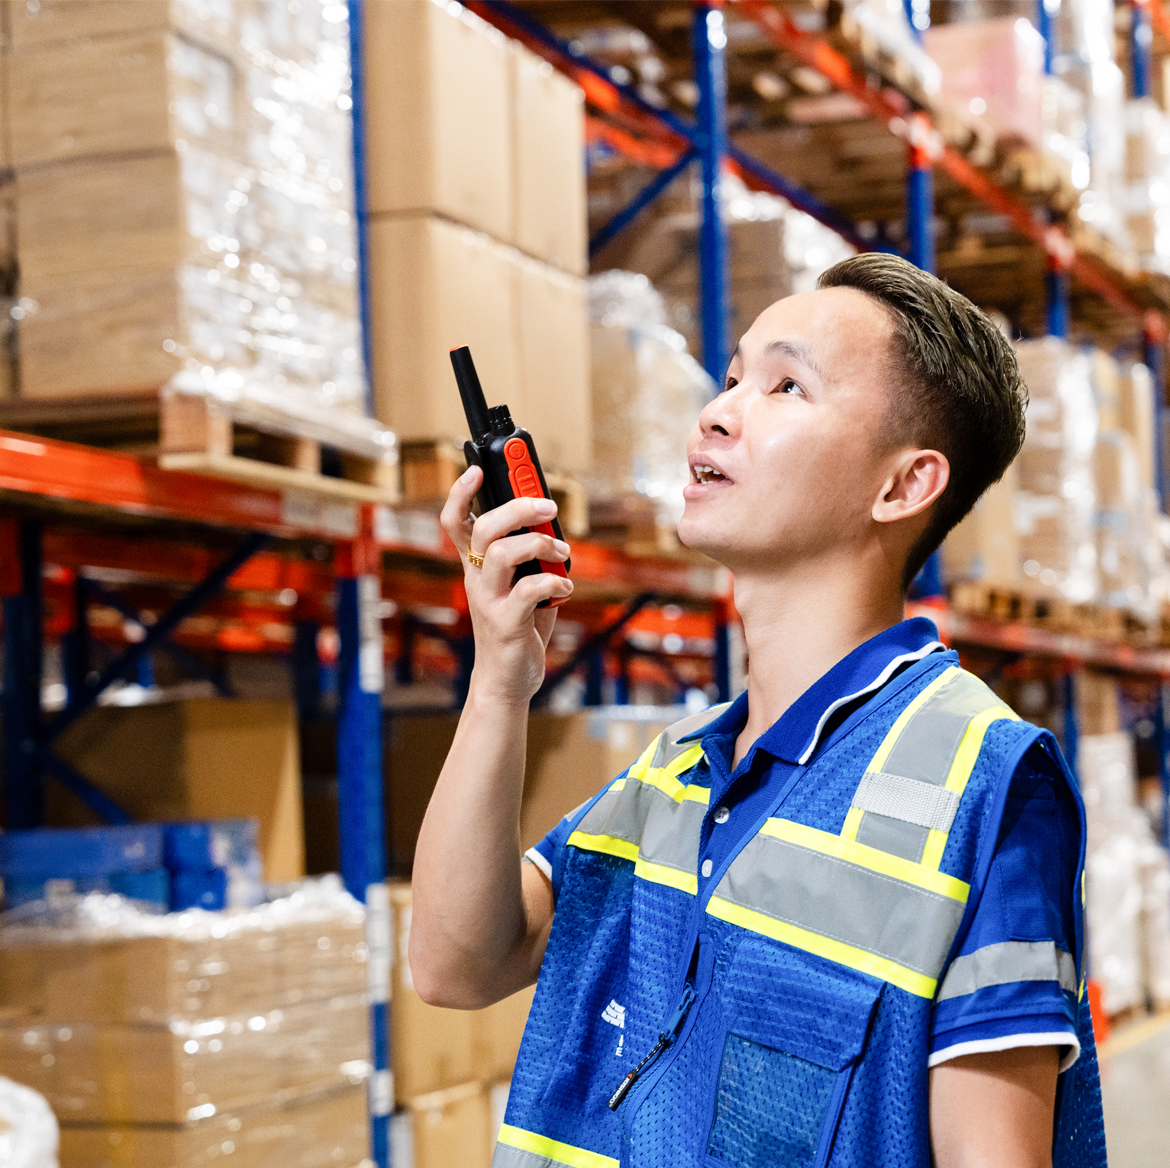 A Morrison warehouse employee comunicating on a walkie-talkie to coordinate security at the warehouse. 